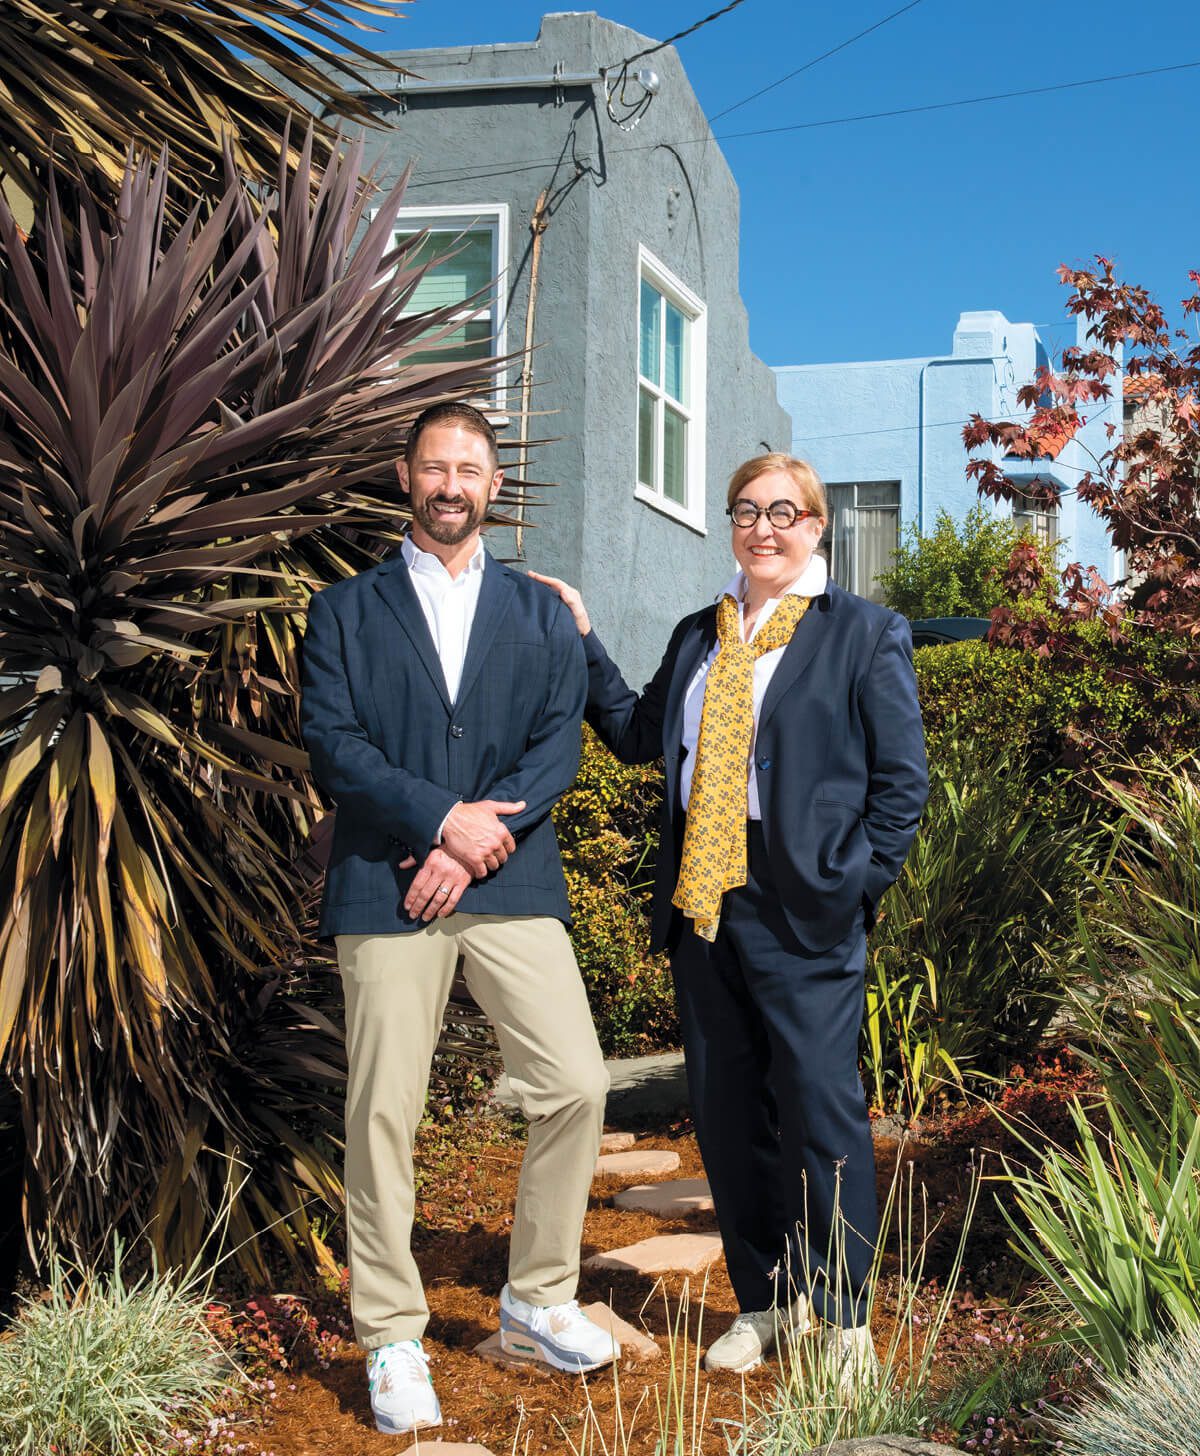 Matt Parker and professional faculty member Maura O’Neill standing outside a home with drought-resistant landscaping.